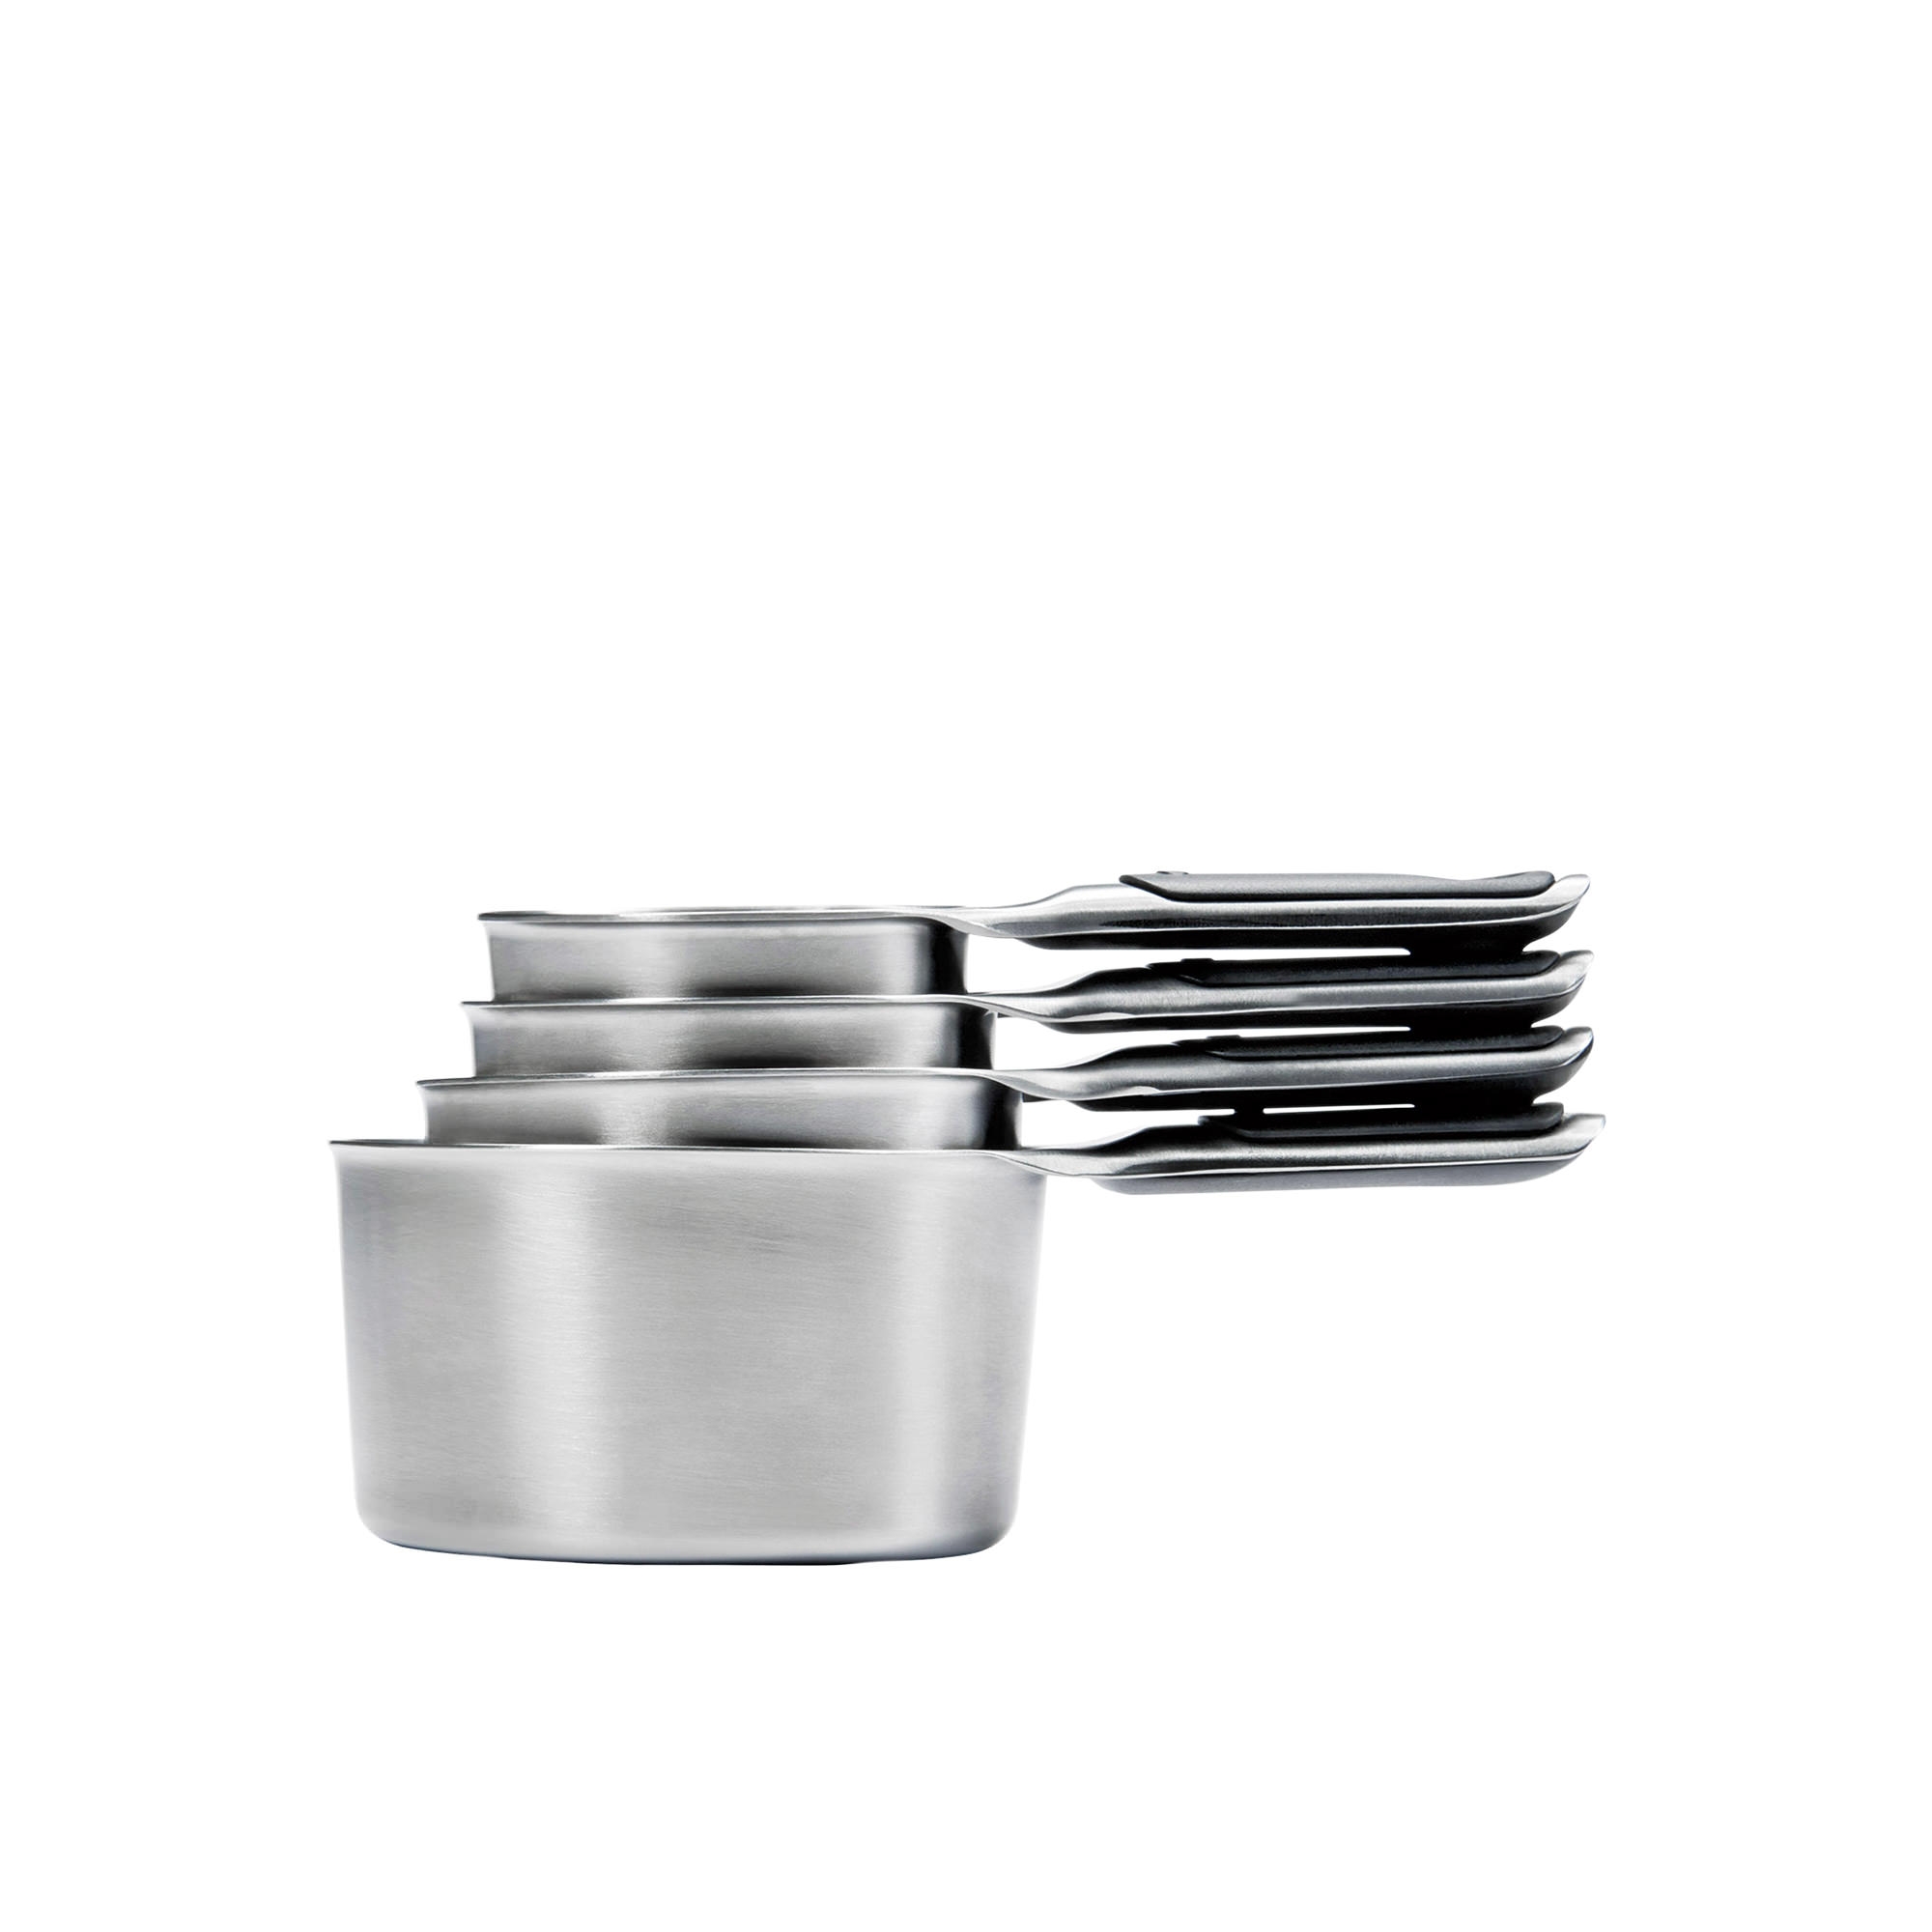 OXO Good Grips Stainless Steel Measuring Cup Set 4pc Image 1